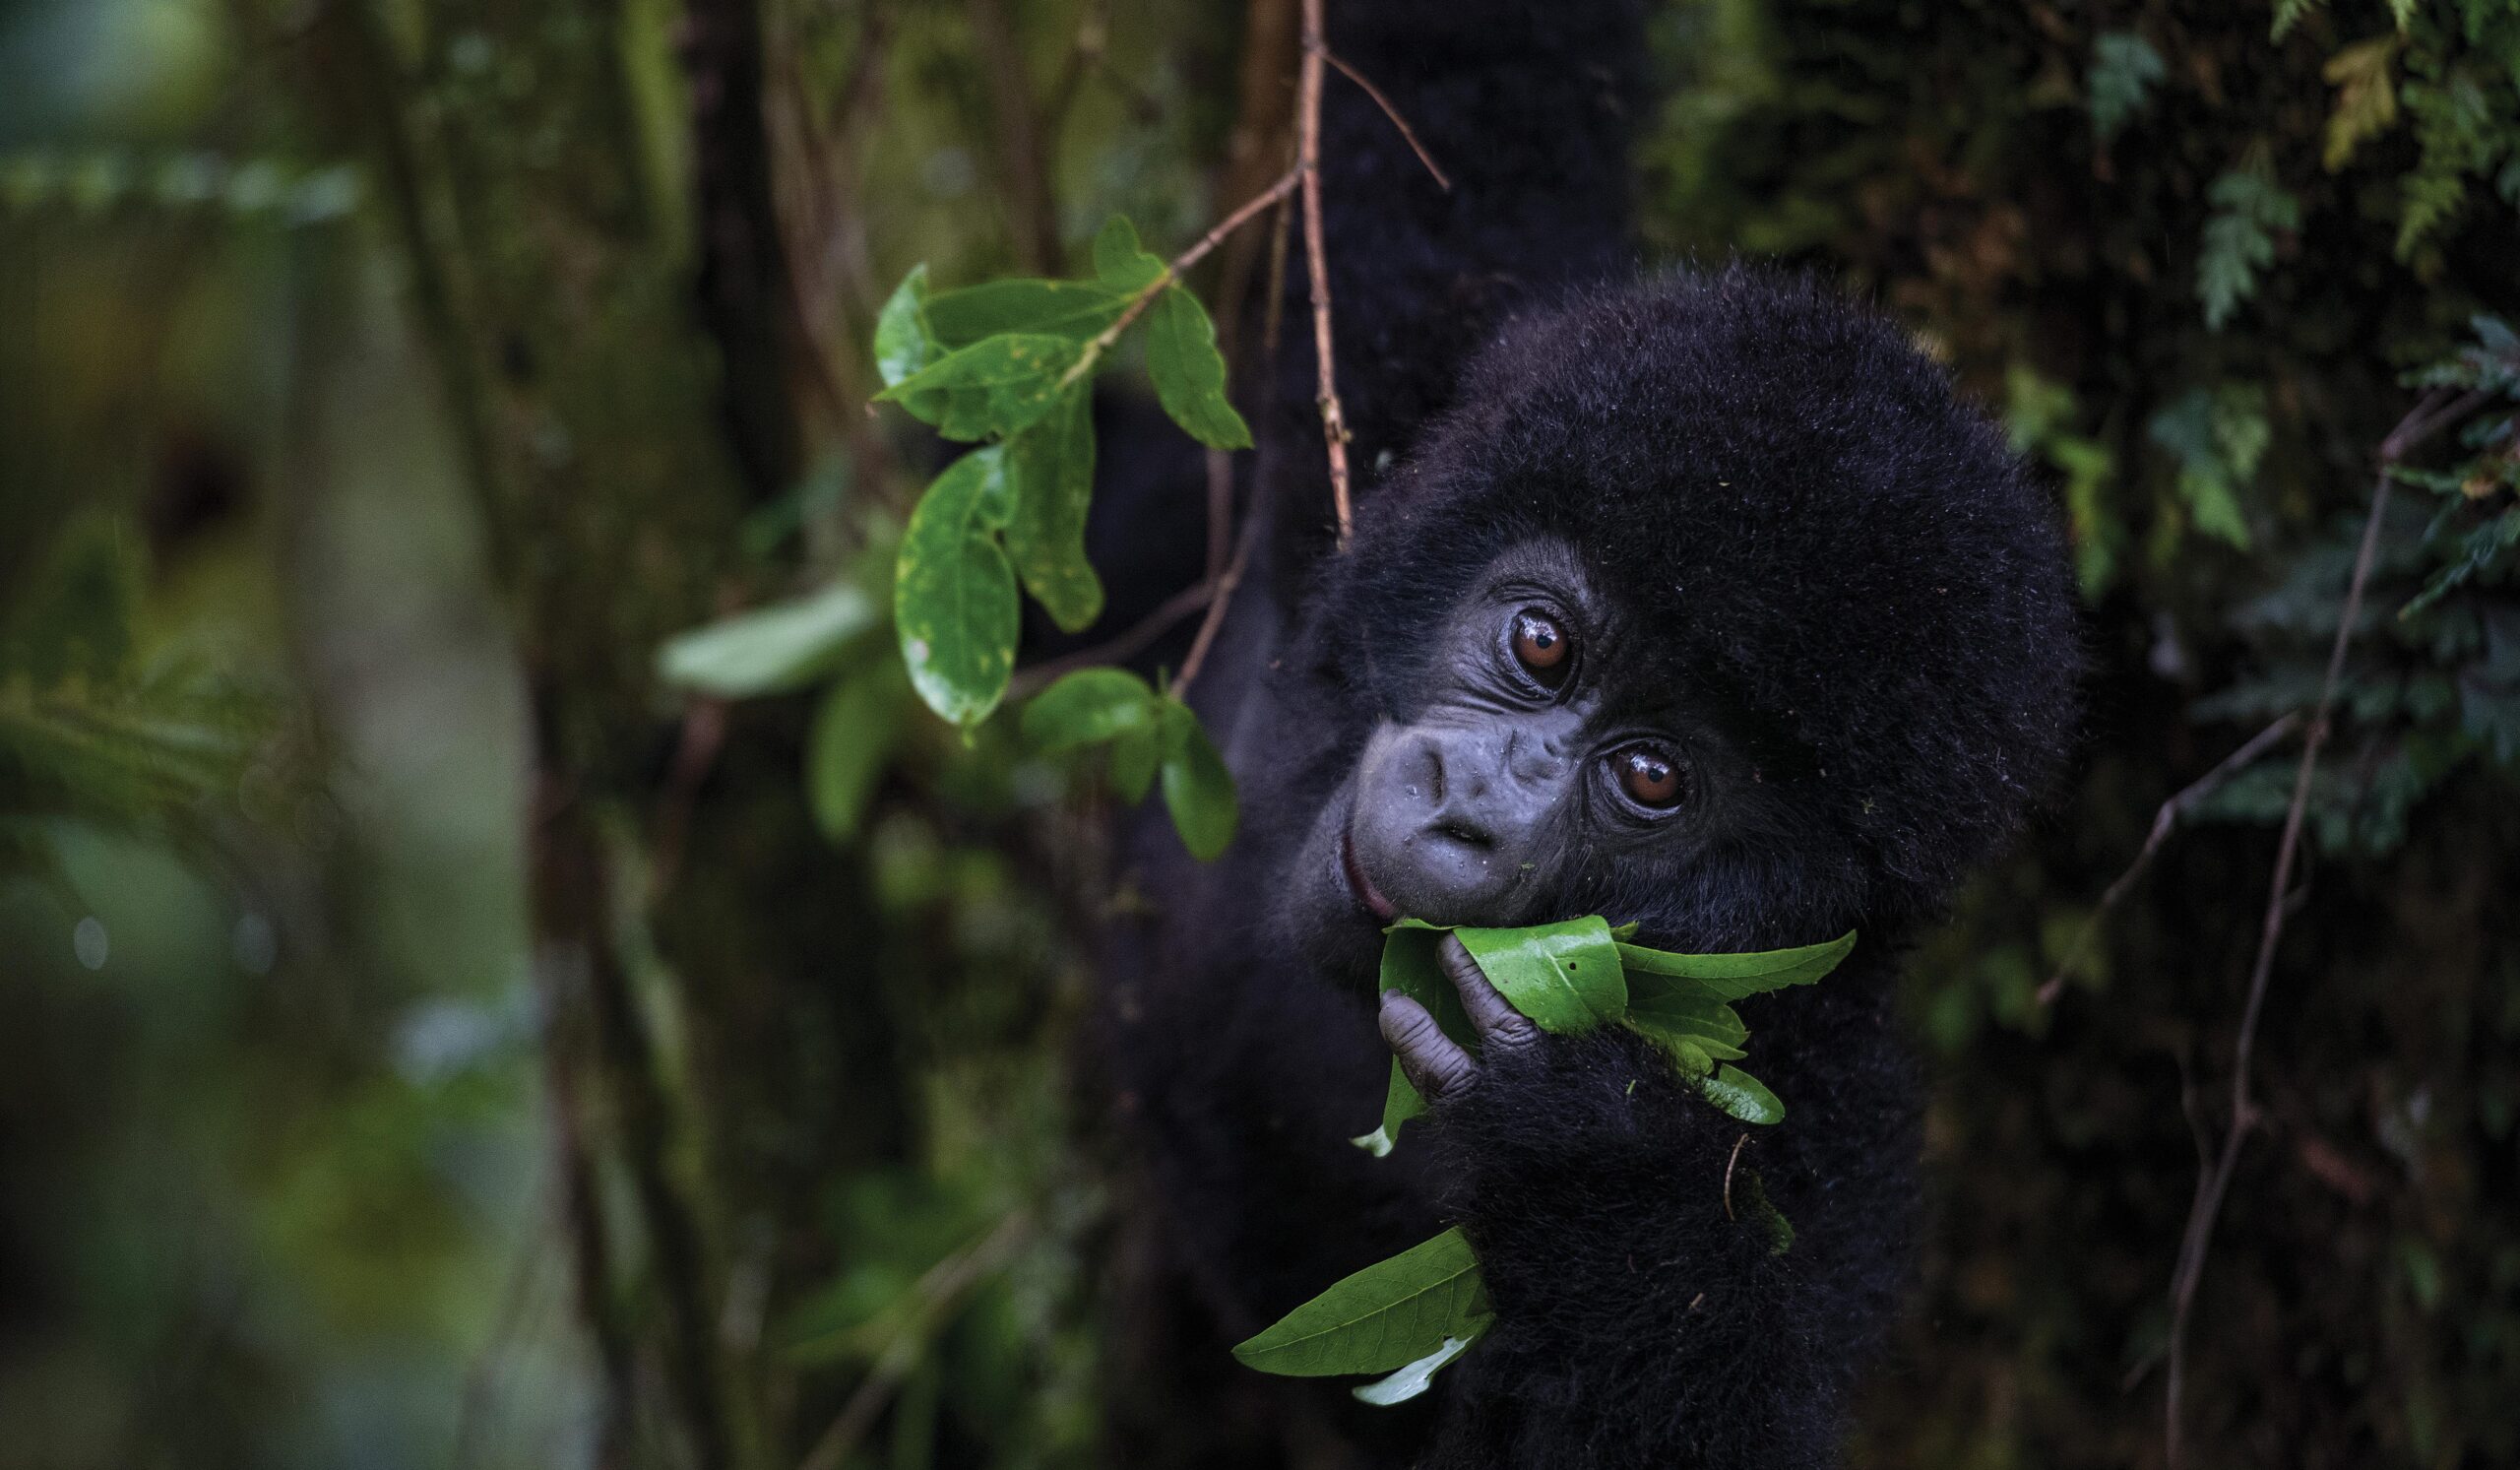 How many Gorillas are left in the world?